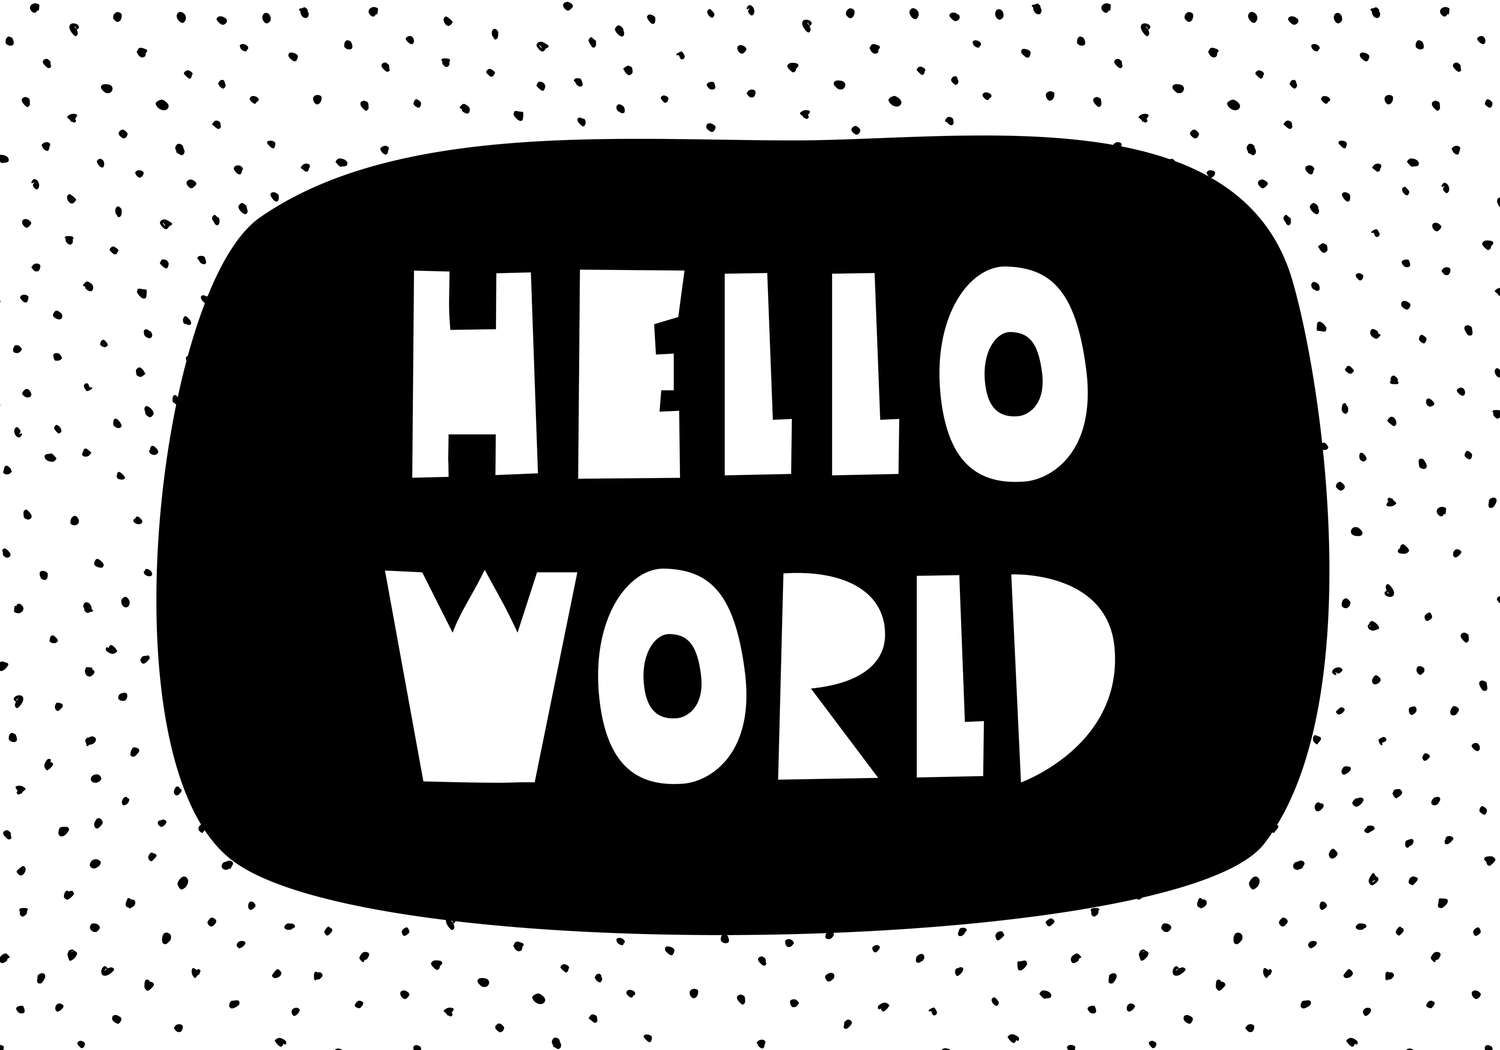             Photo wallpaper for children's room with "Hello World" lettering - textured non-woven
        